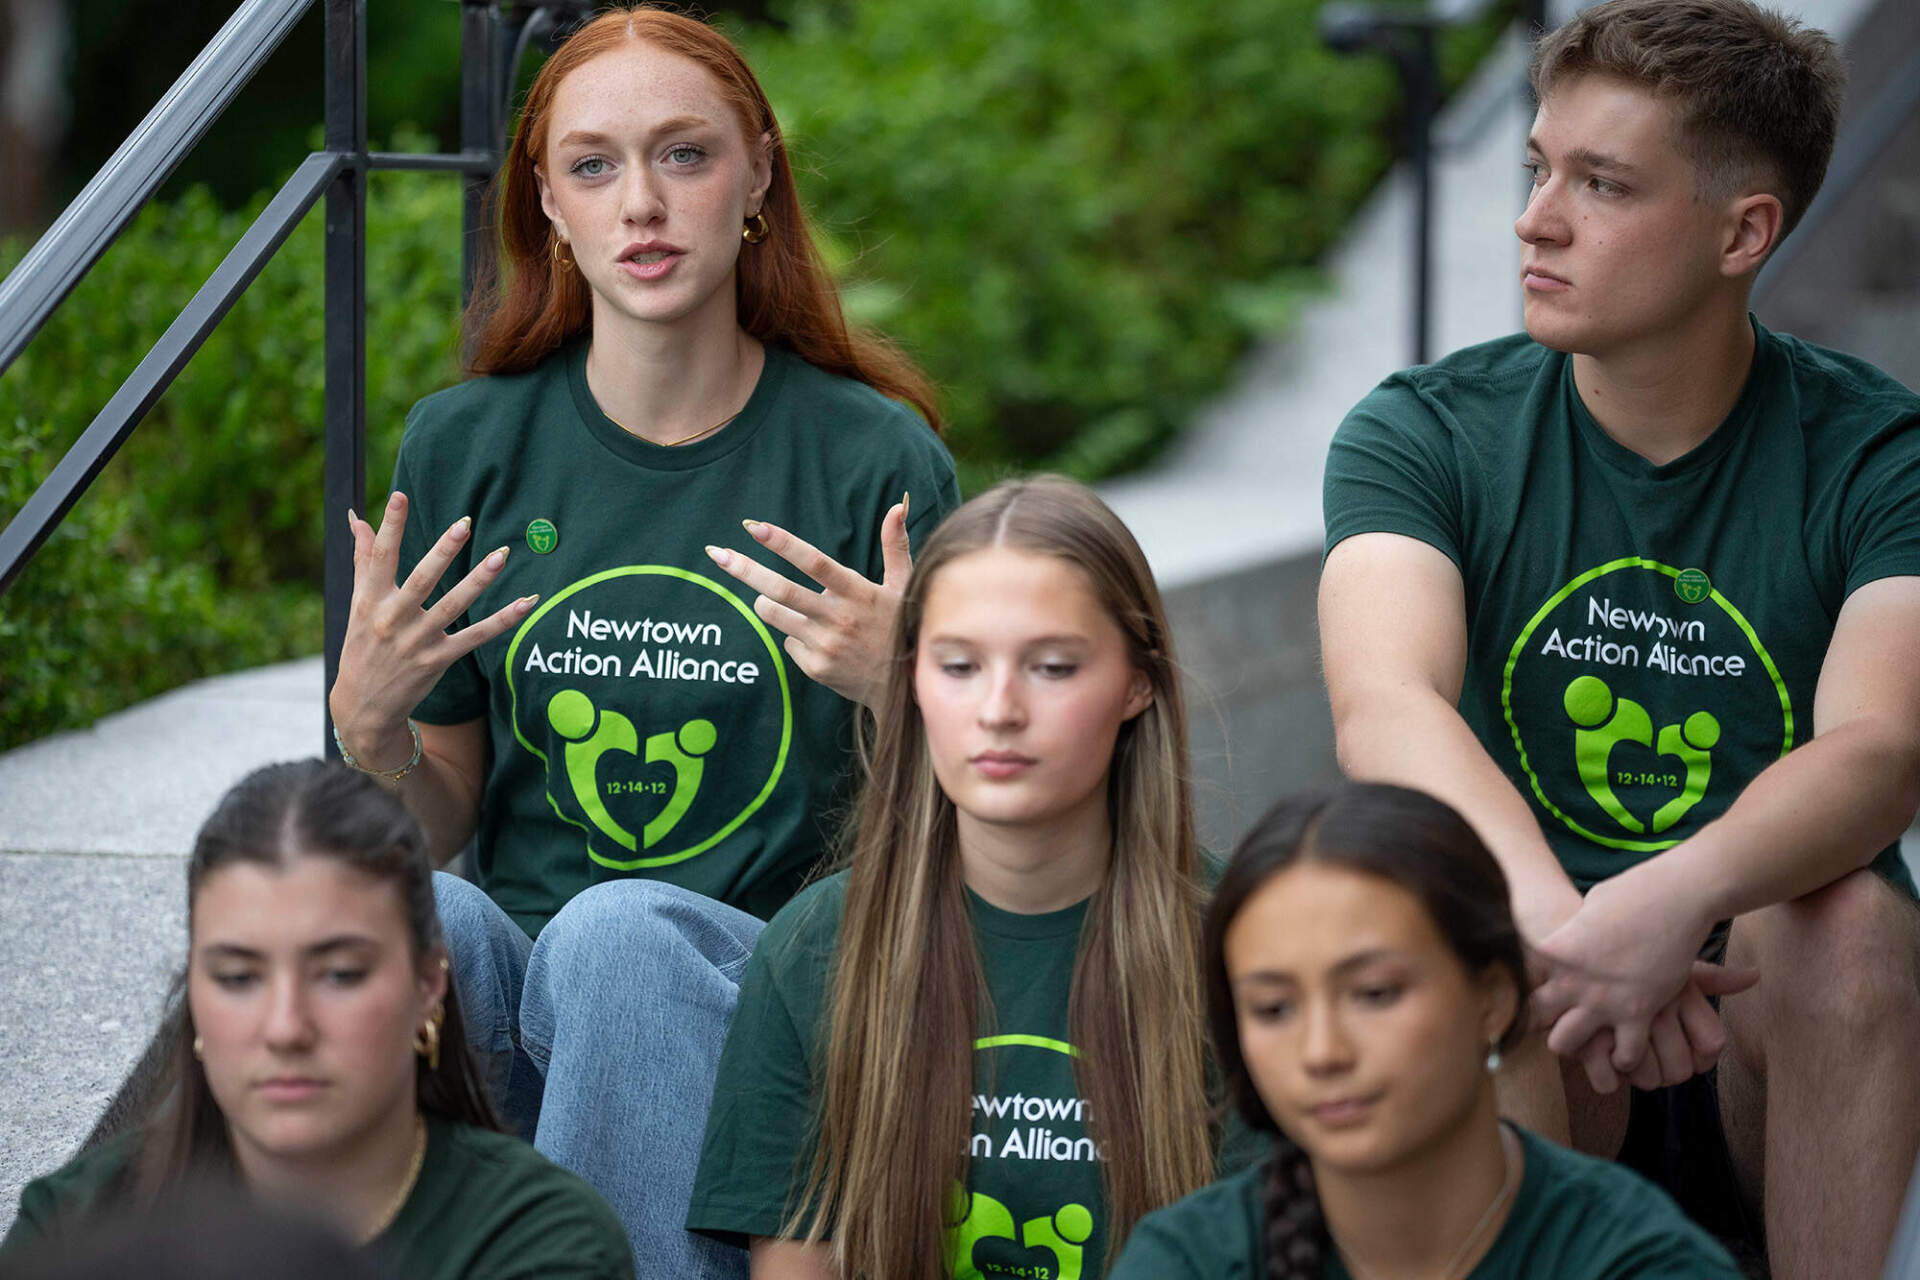 Survivors of the 2012 Sandy Hook Elementary School shooting share their thoughts on high school graduation before a rally against gun violence on Friday, June 7, 2024 in Newtown, Conn. (AP Photo/Bryan Woolston)